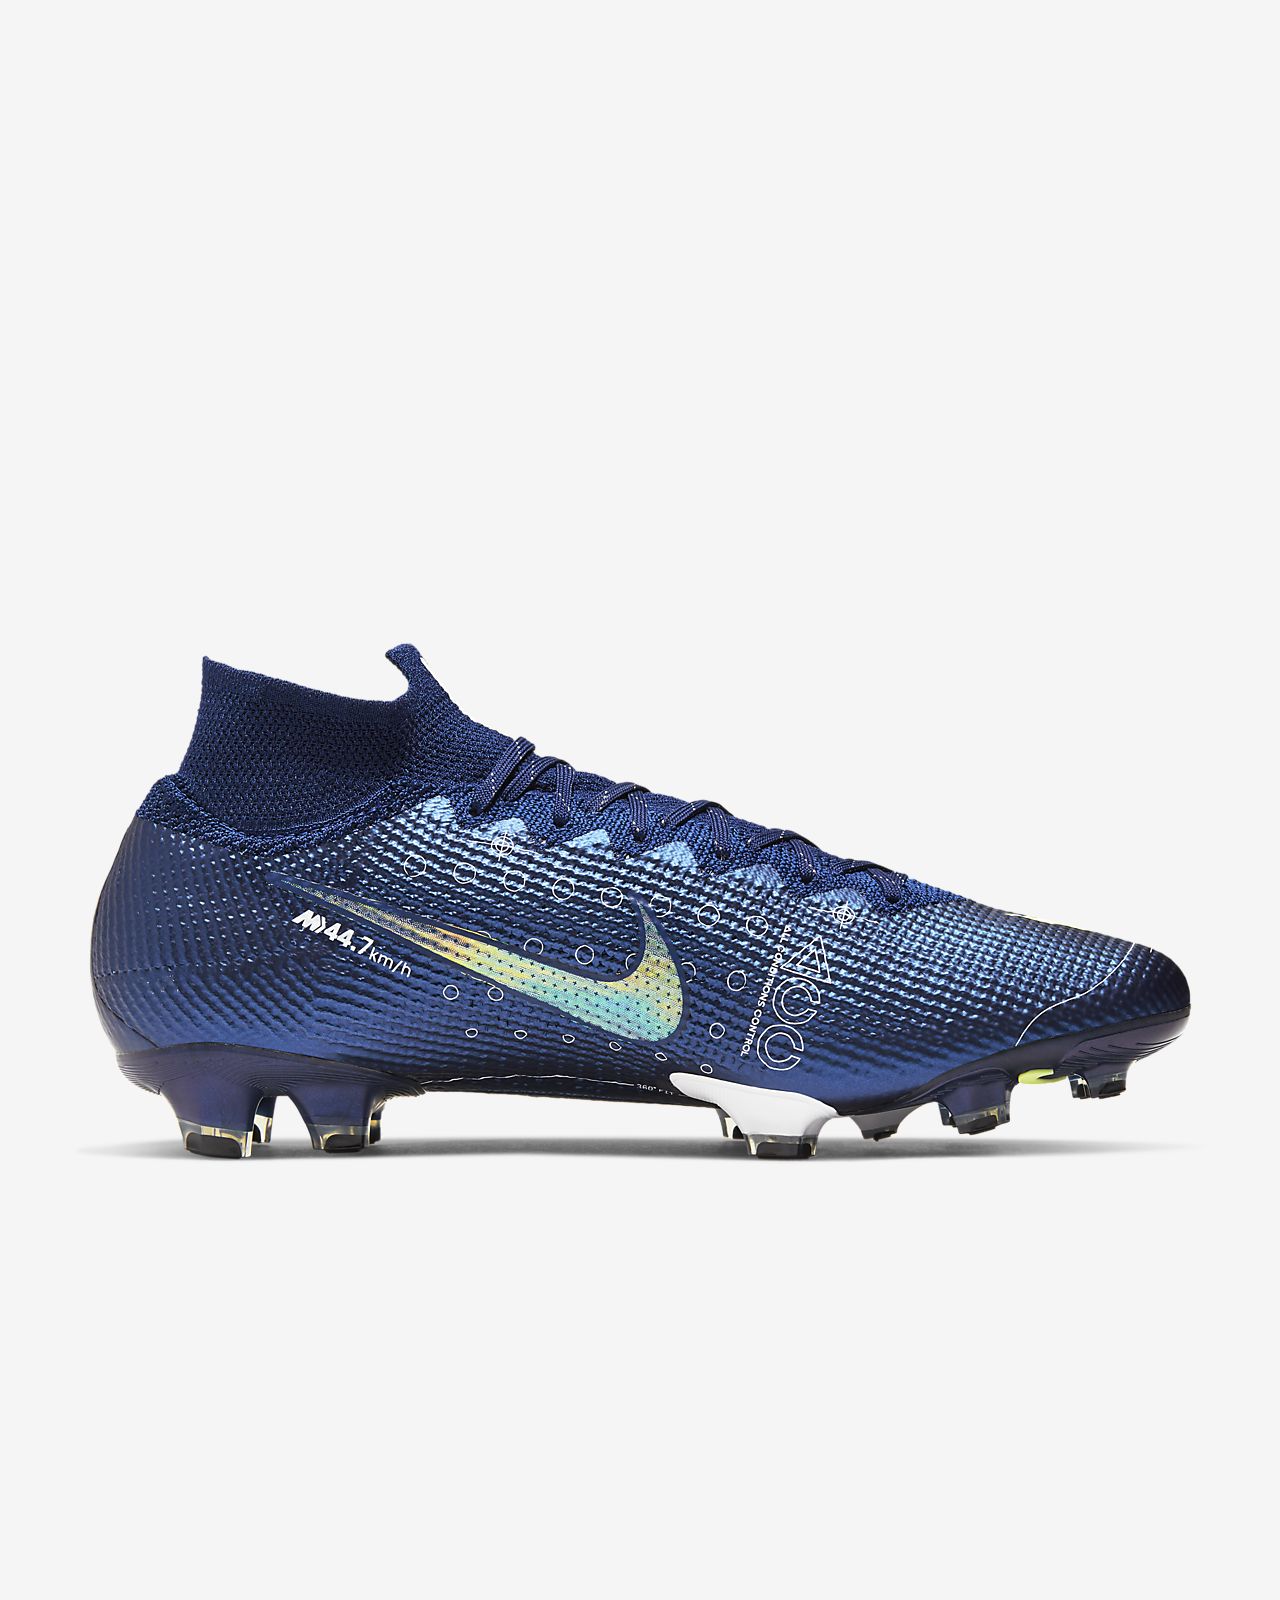 Men's boots Nike Mercurial Superfly 7 Academy MDS TF.